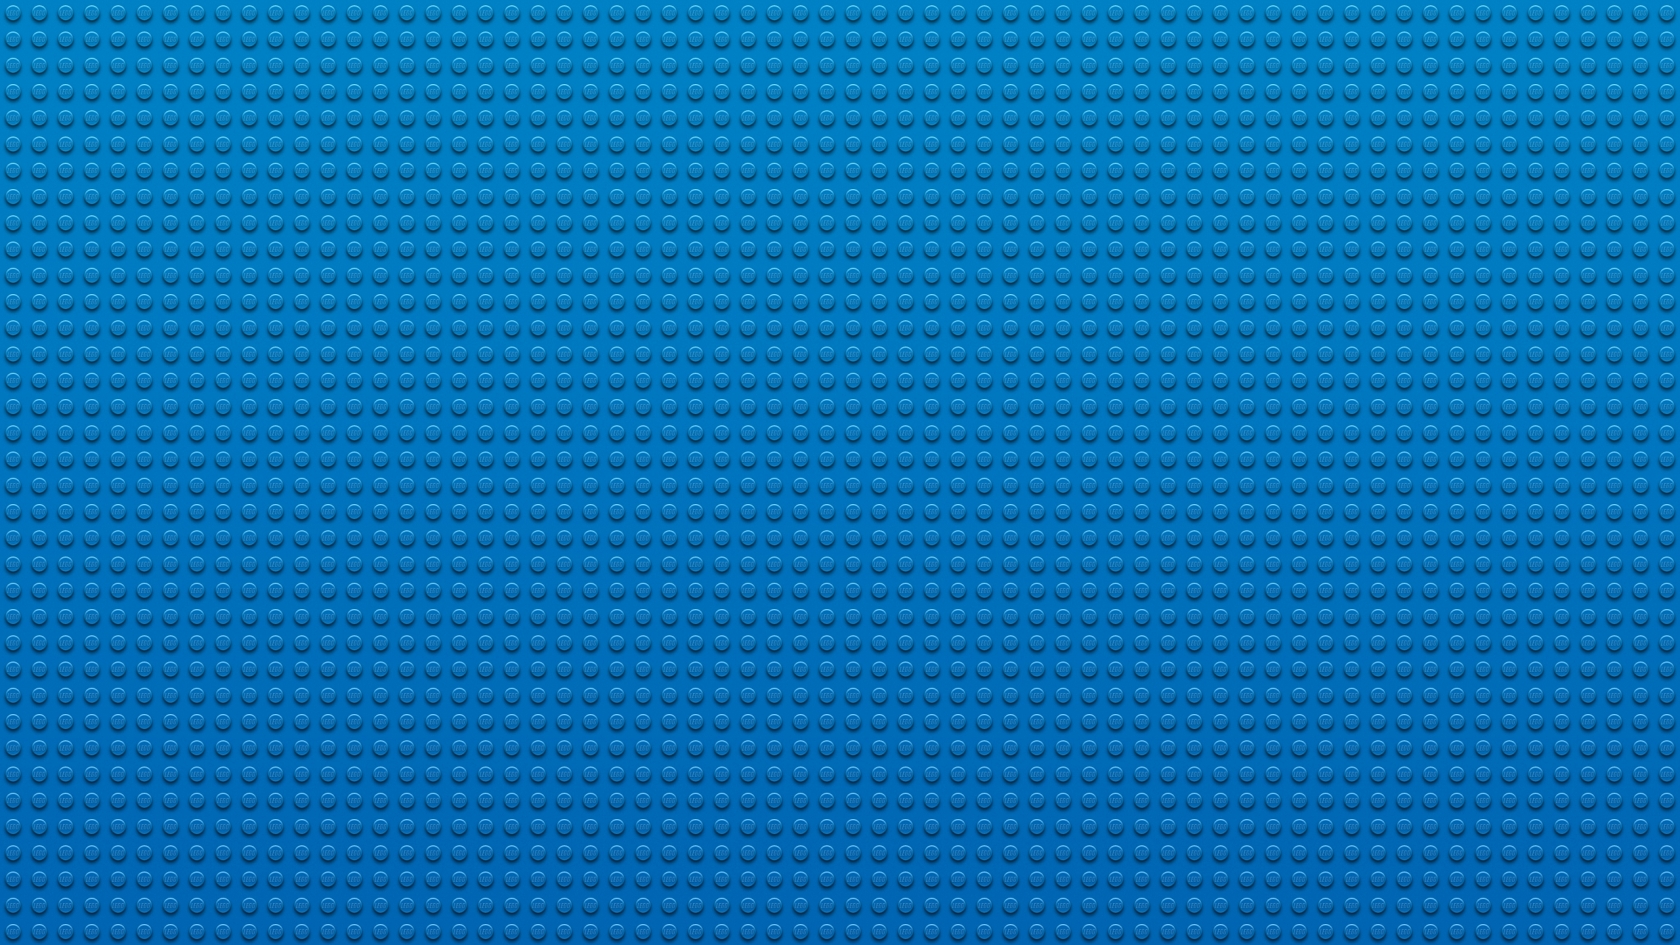 Lego Texture for 1680 x 945 HDTV resolution